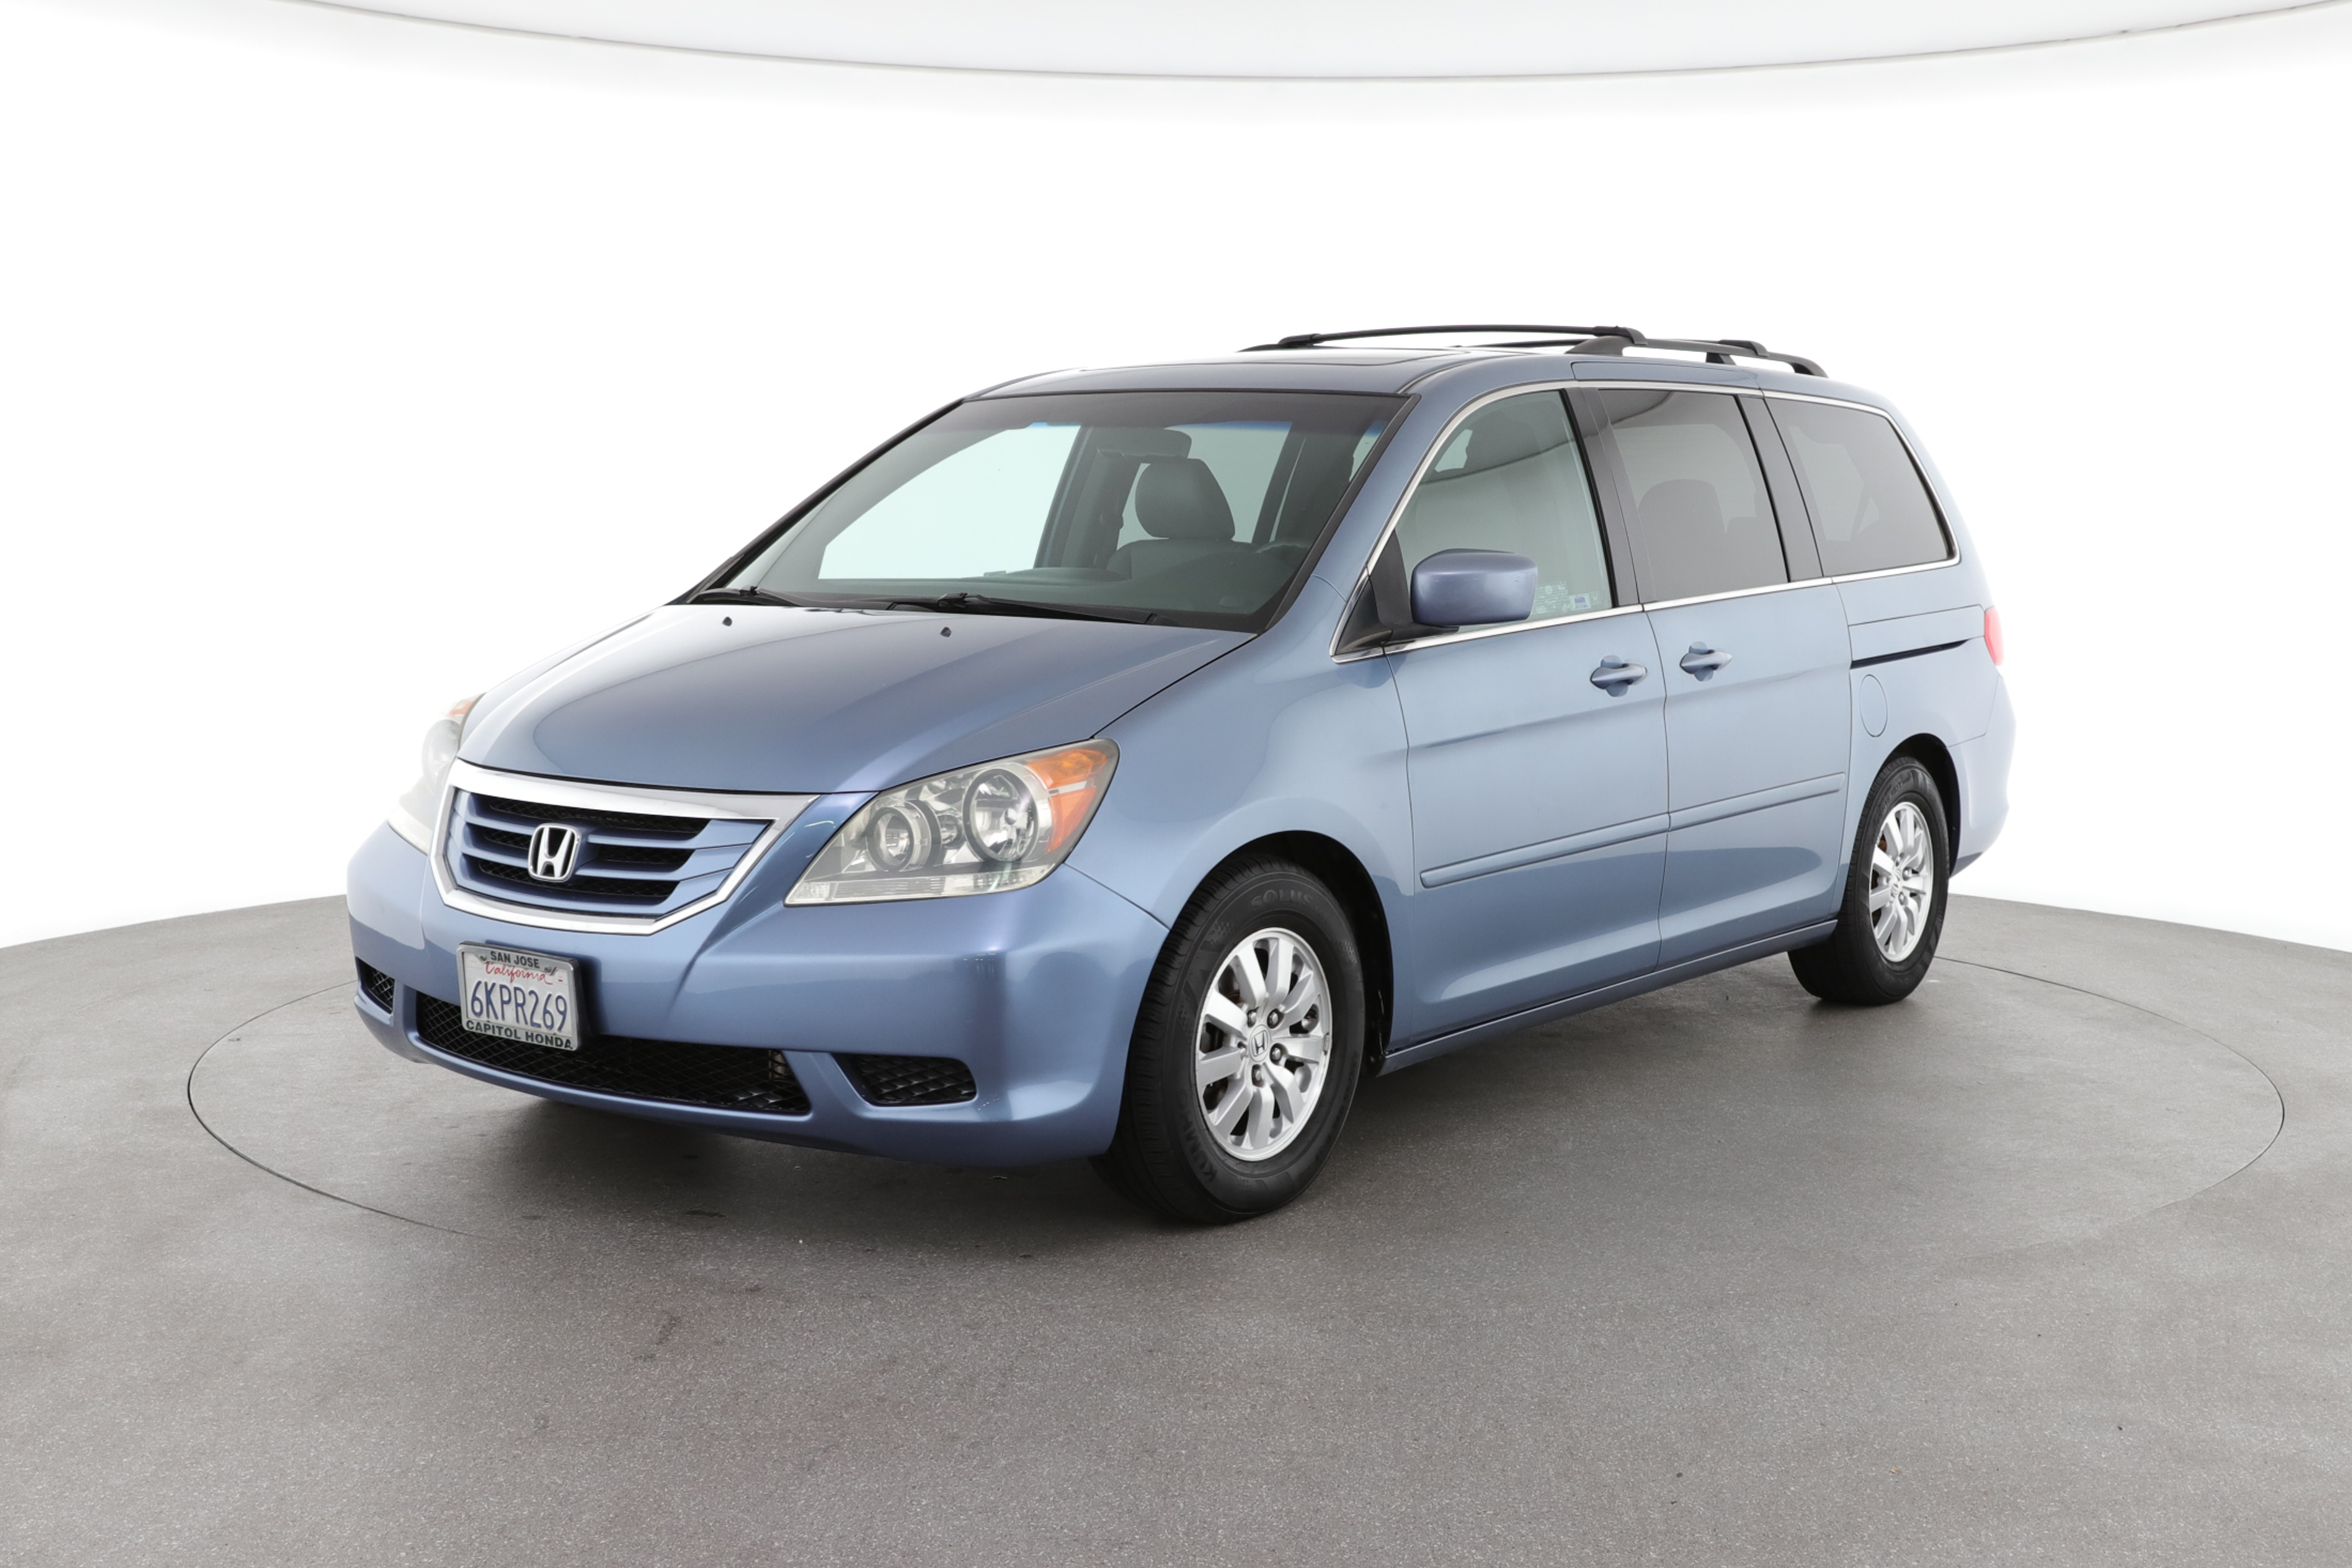 Used Honda Odyssey for Sale | Shift